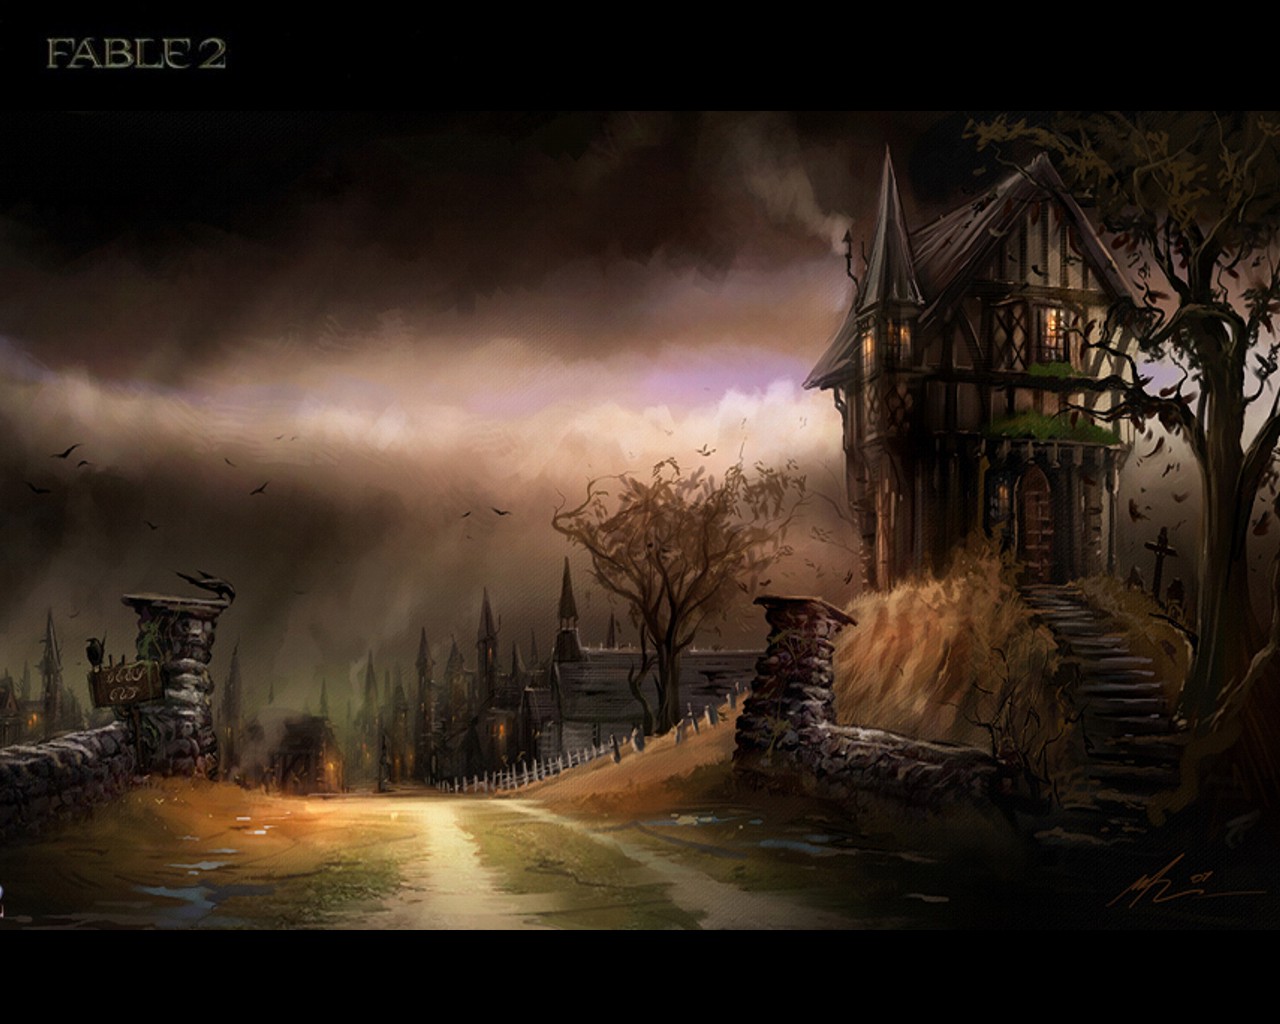 Download HQ Fable 2 wallpaper / Games / 1280x1024